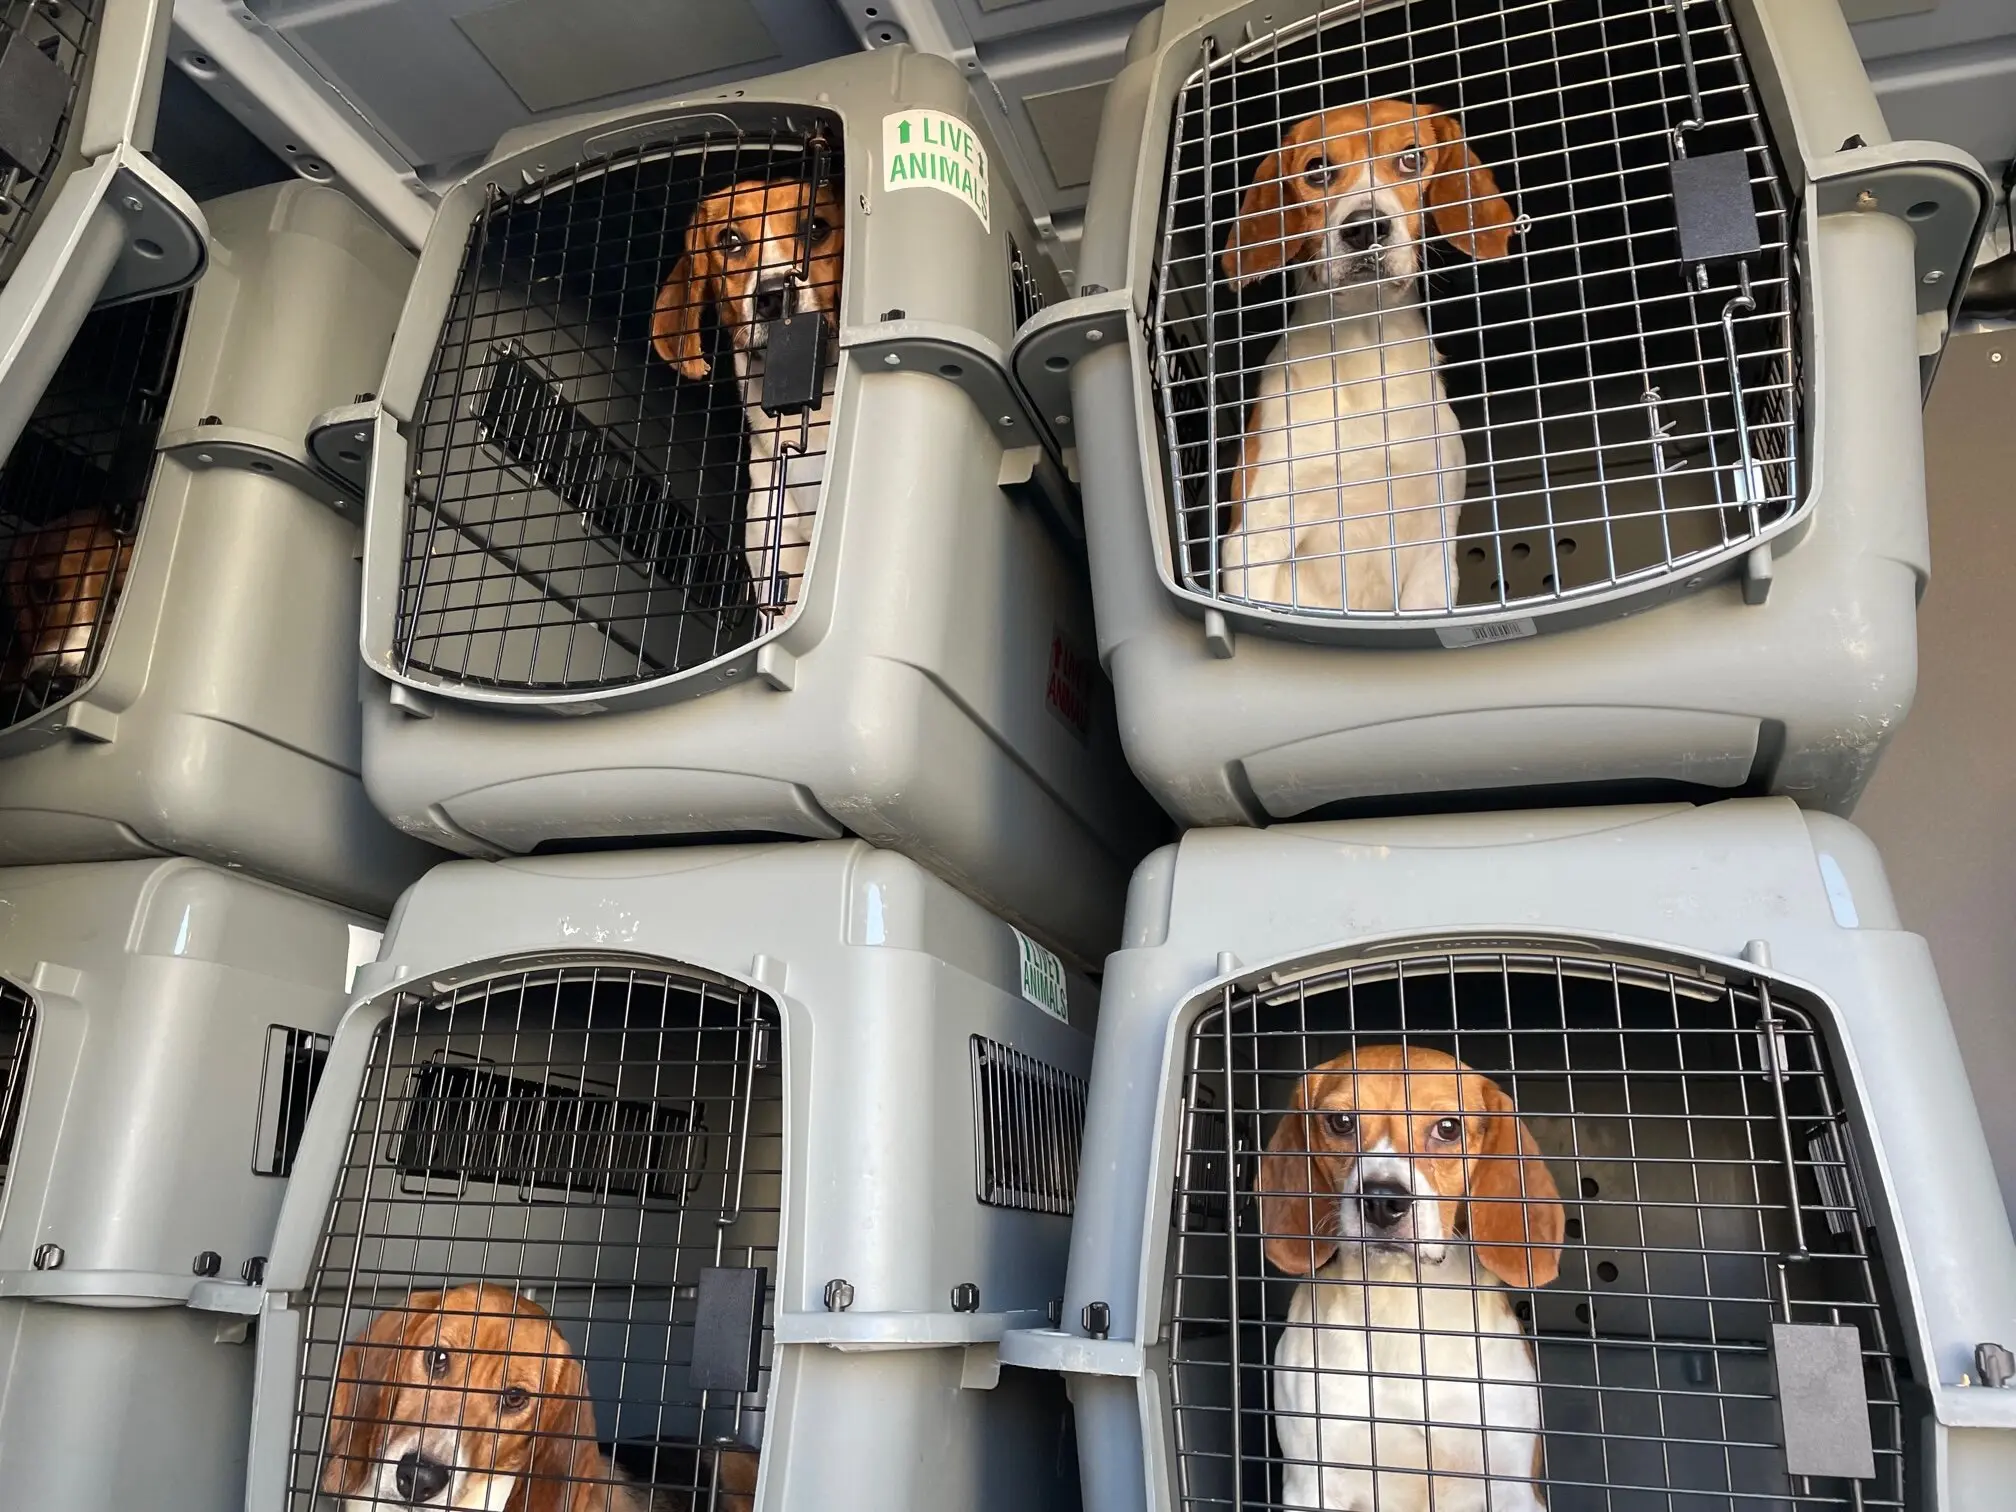 More than 100 beagles arrived in a truck from a breeding facility in Cumberland, Va., to Homeward Trails Animal Rescue.Credit...Sue Bell/Homeward Trails